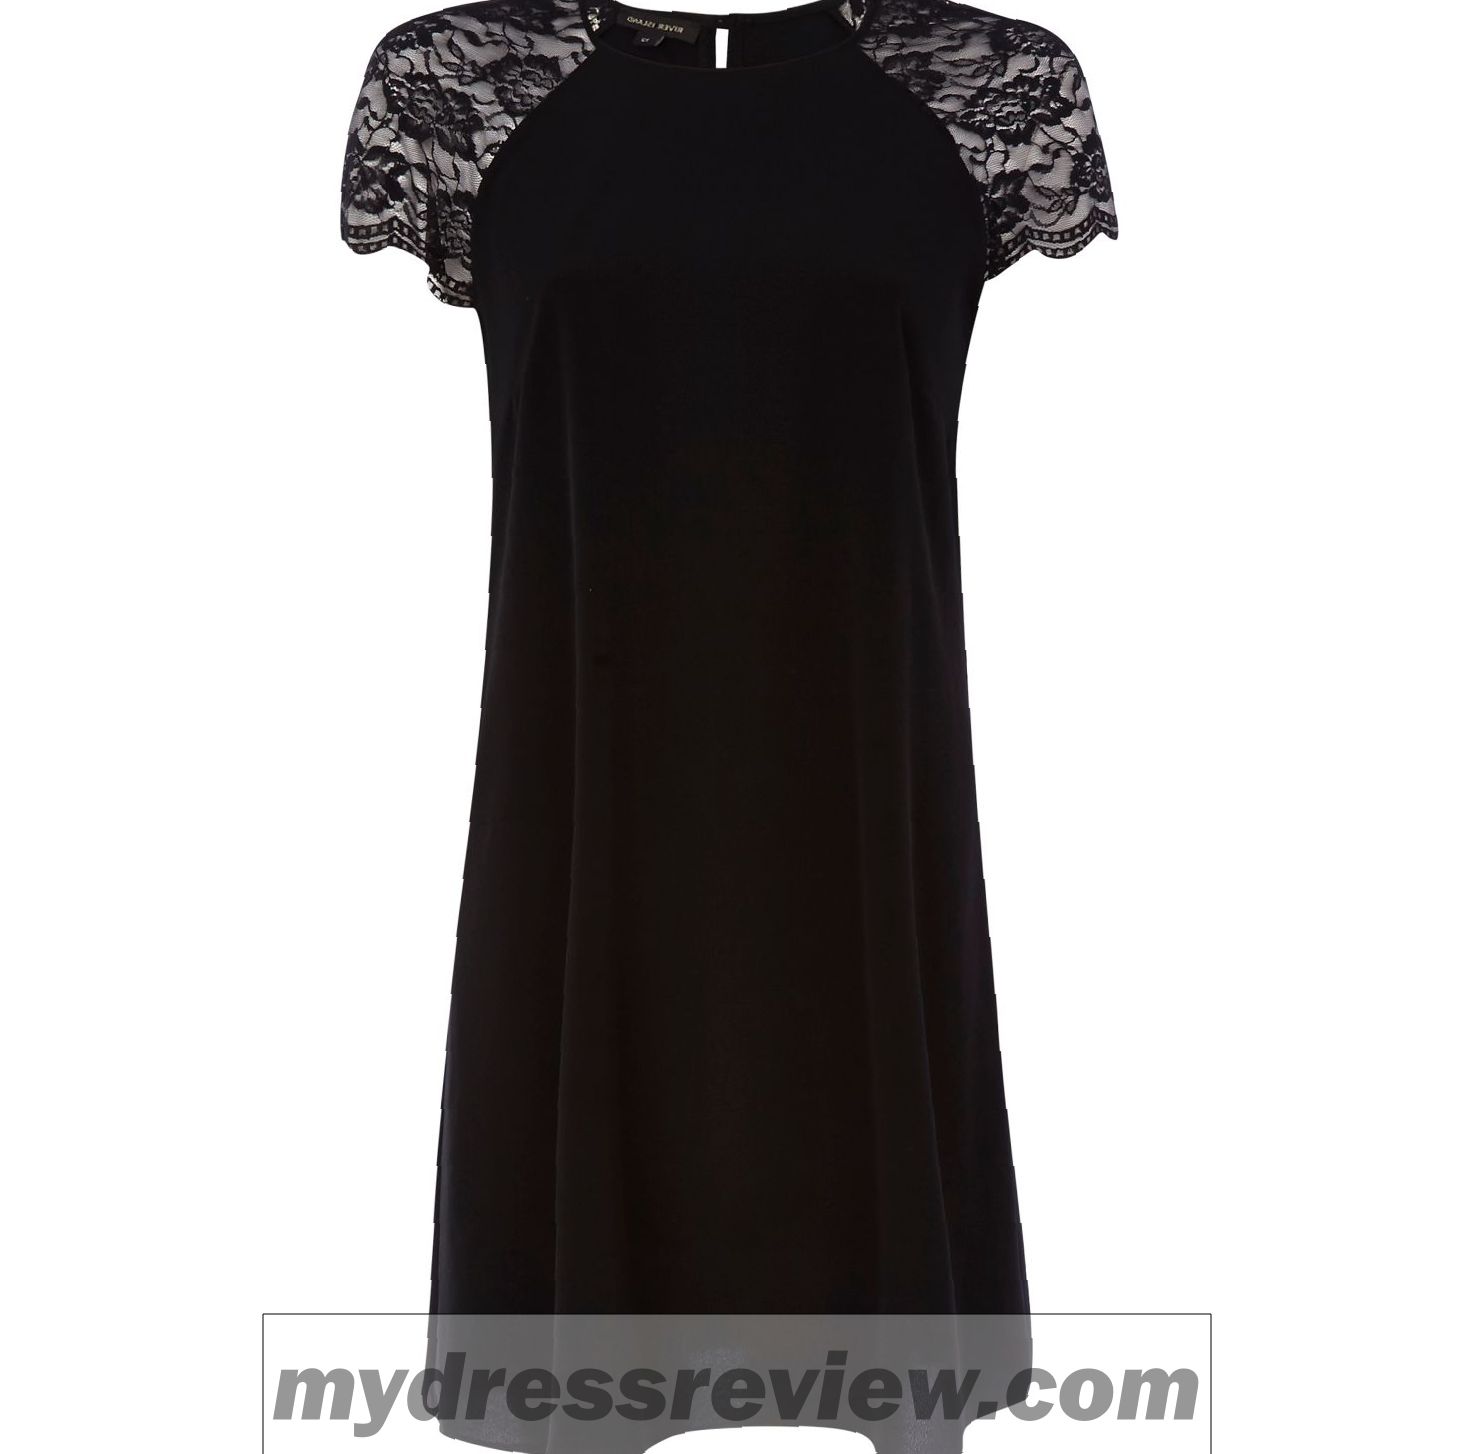 Black Lace River Island Dress And Top 10 Ideas